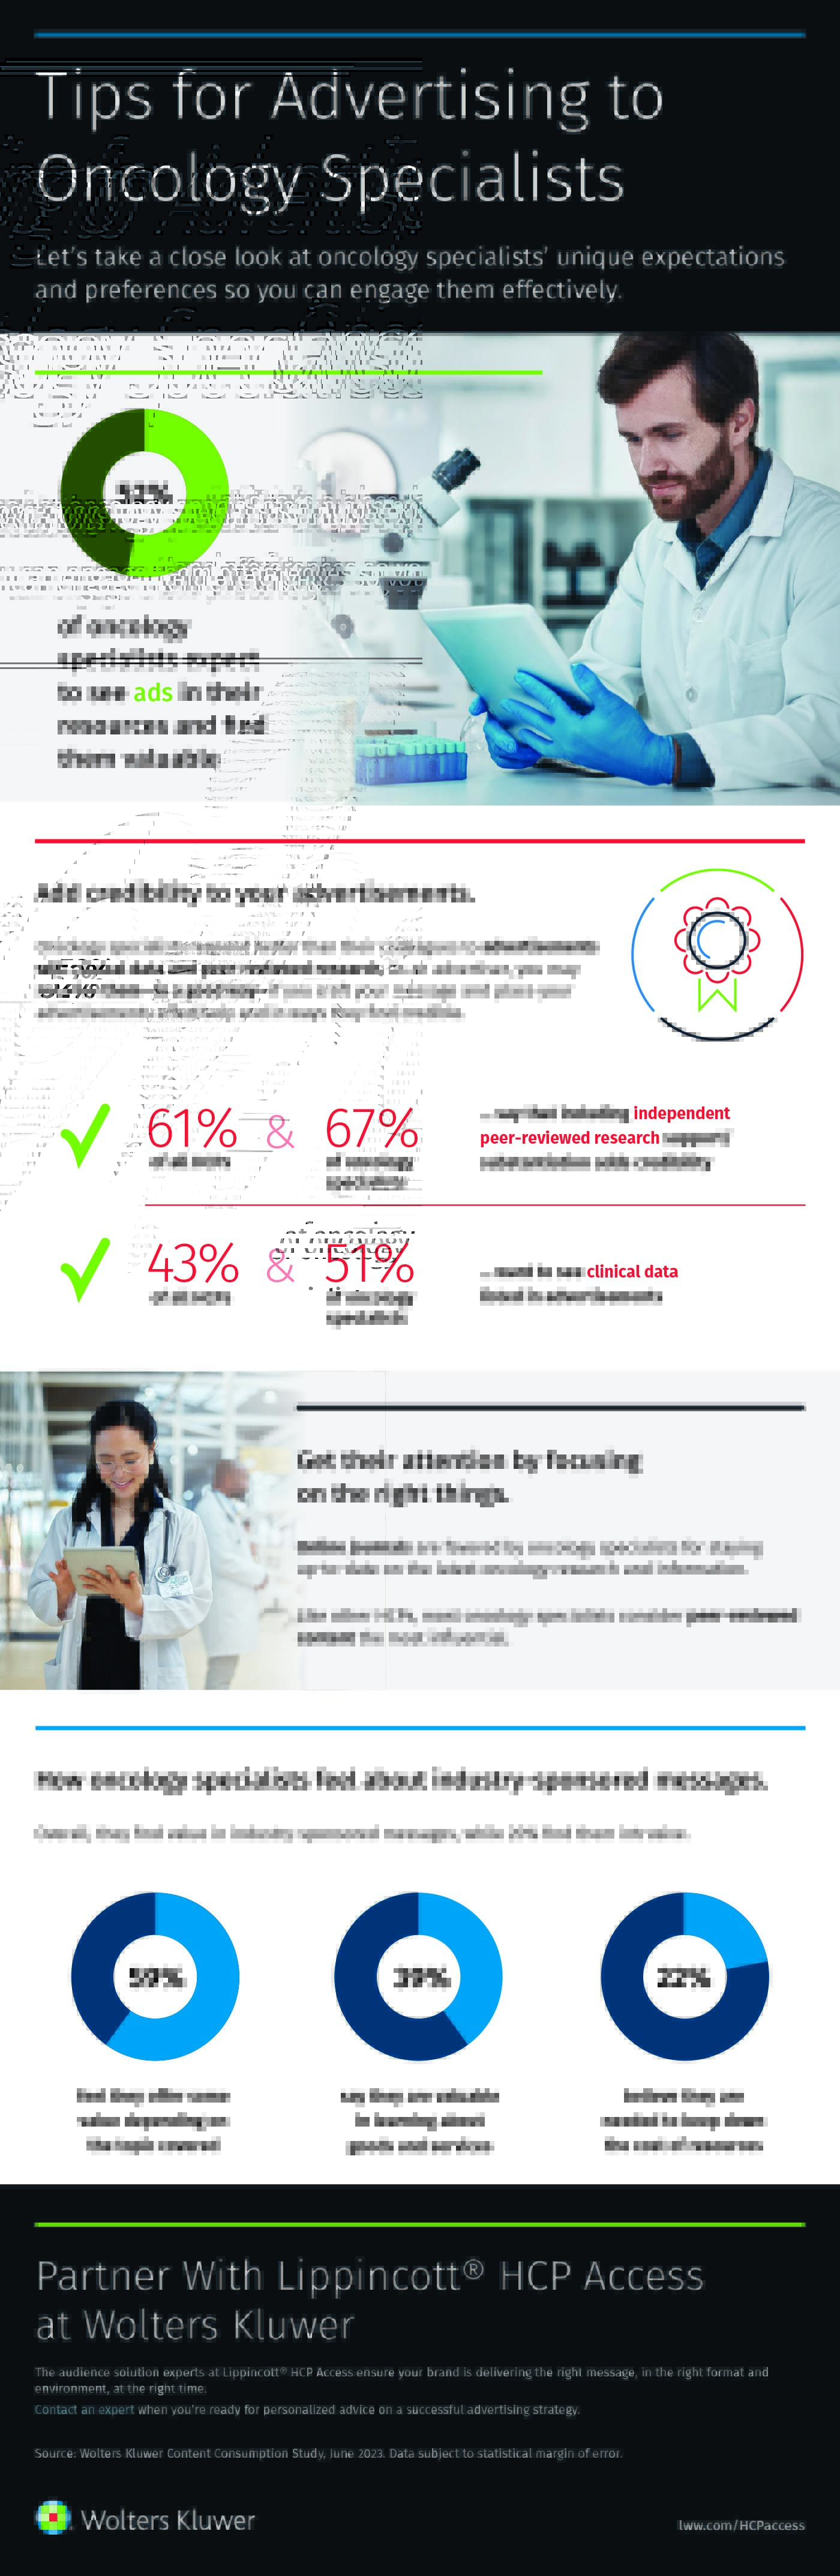 infographic-tips-for-advertising-to-oncology-specialists.jpg